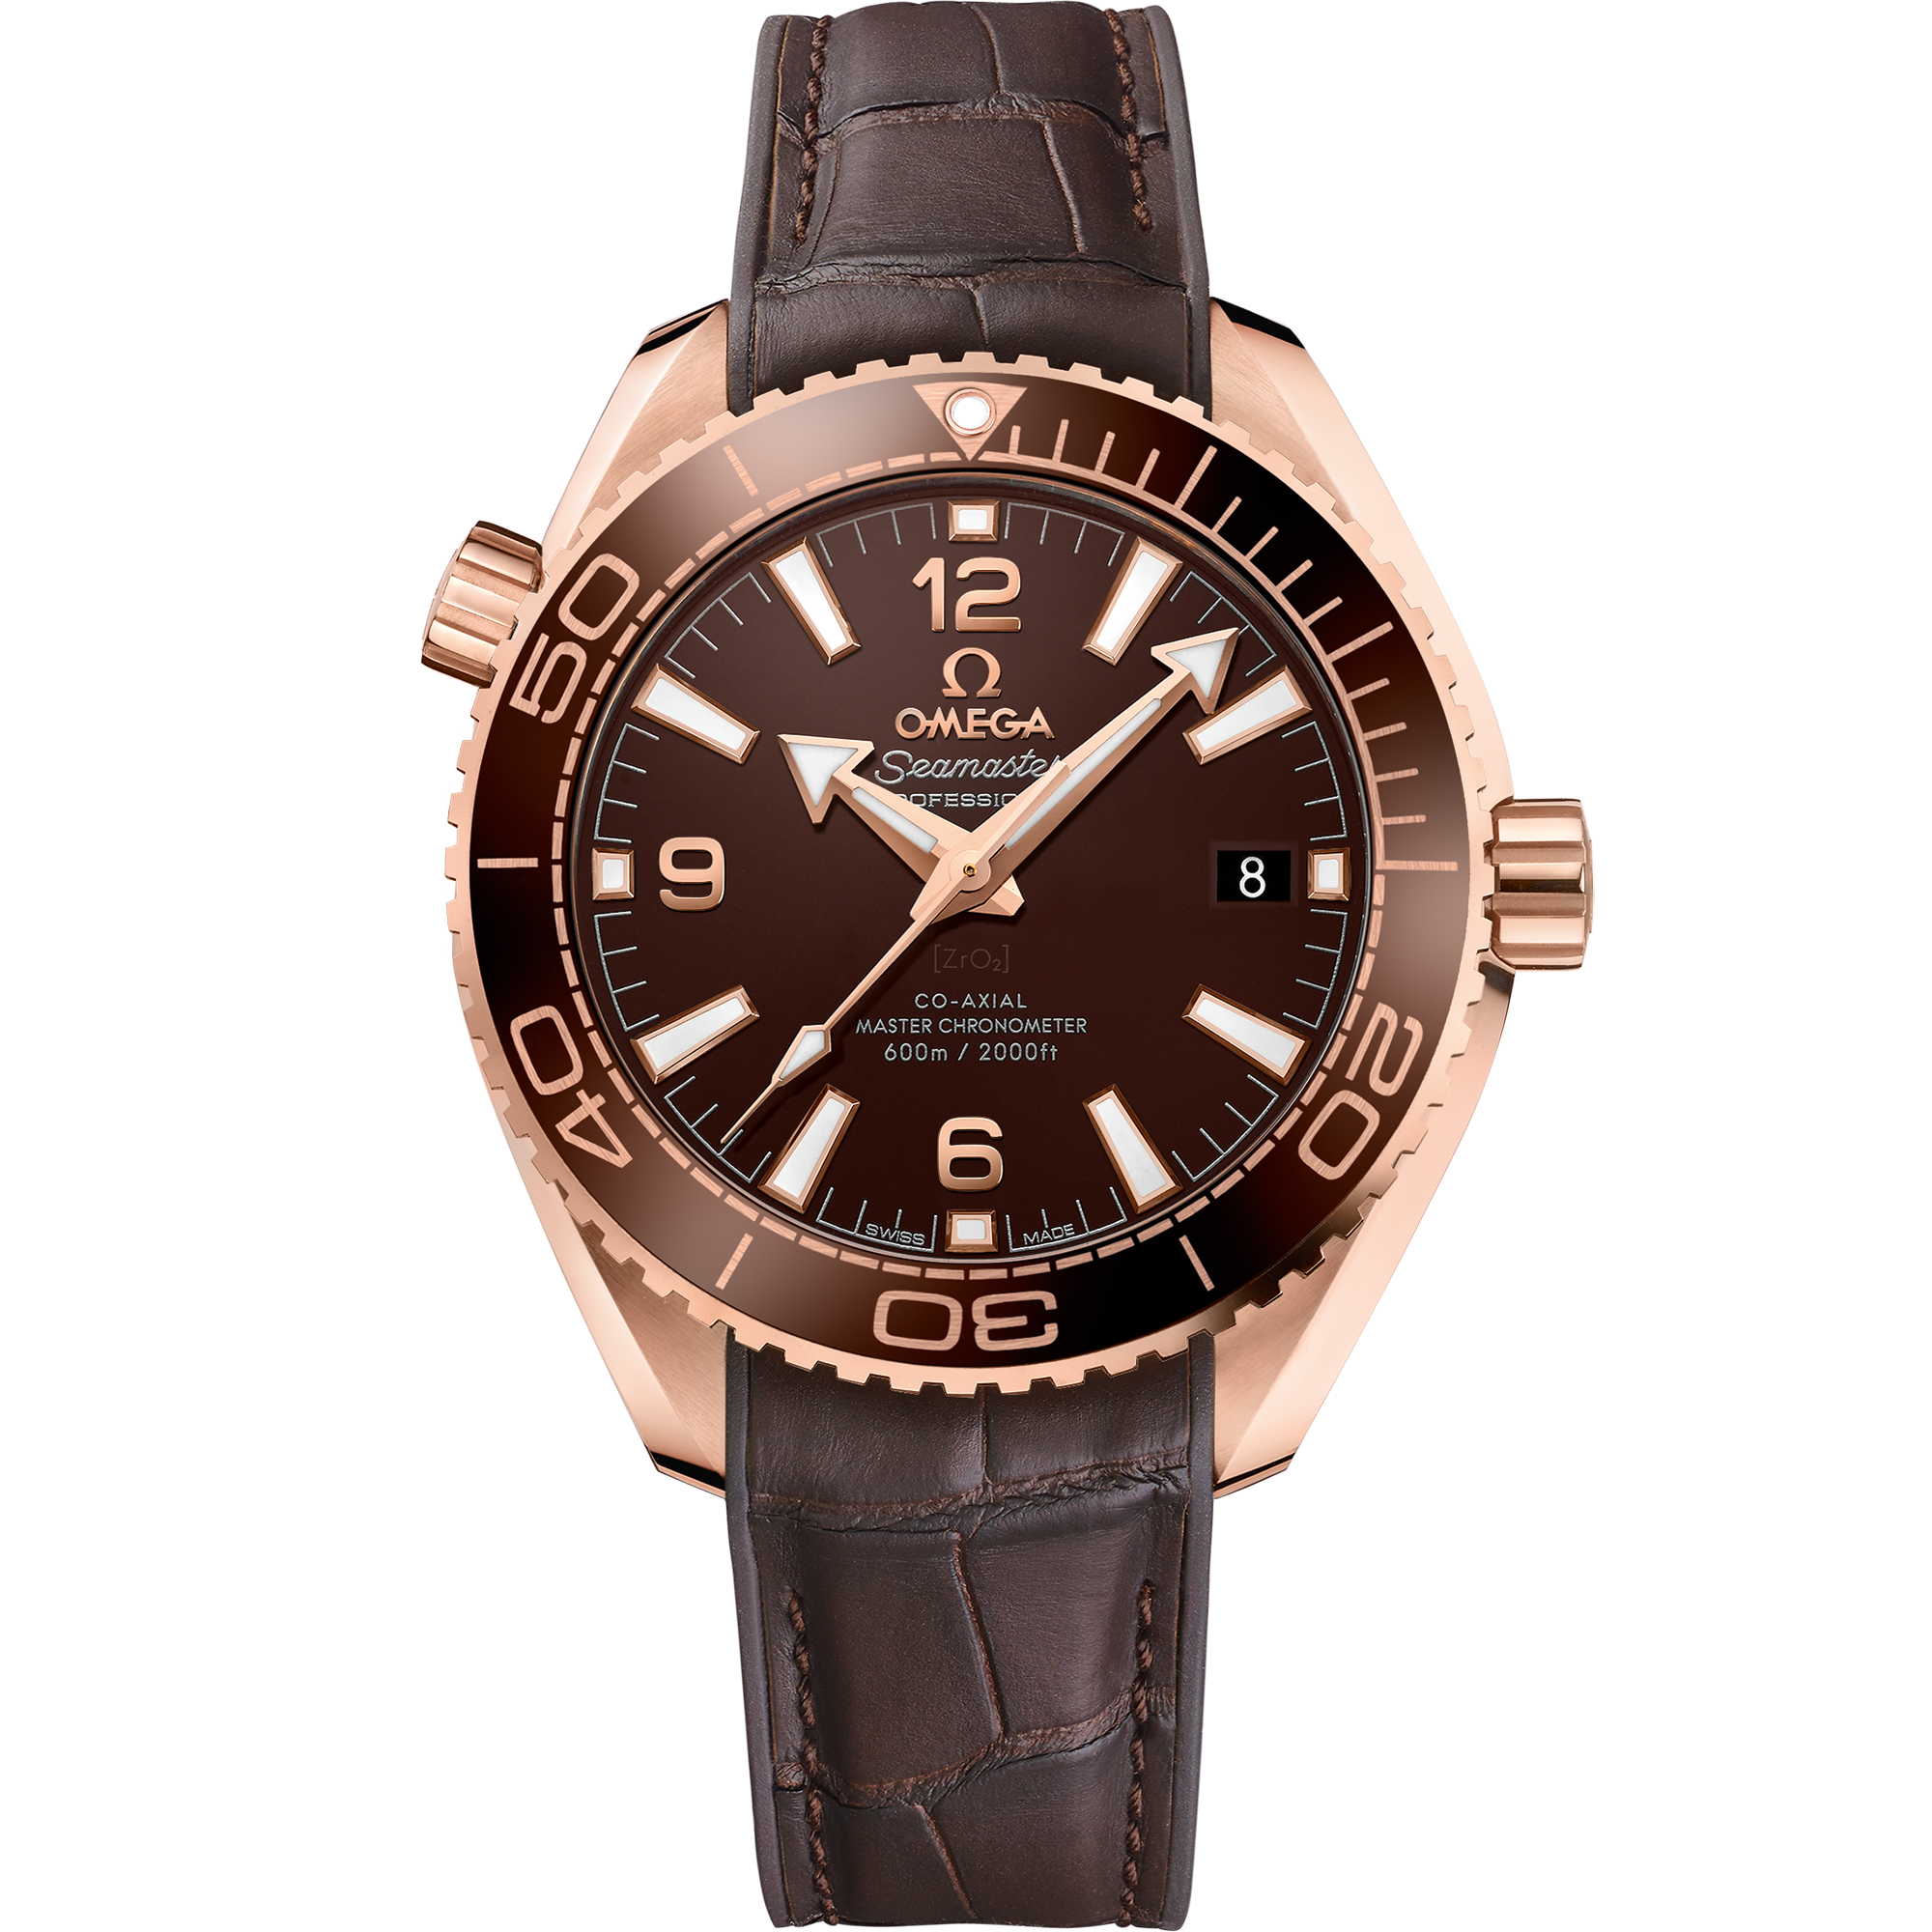 Seamaster 39.5 mm, Sedna™ gold on leather strap with rubber lining - 215.63.40.20.13.001